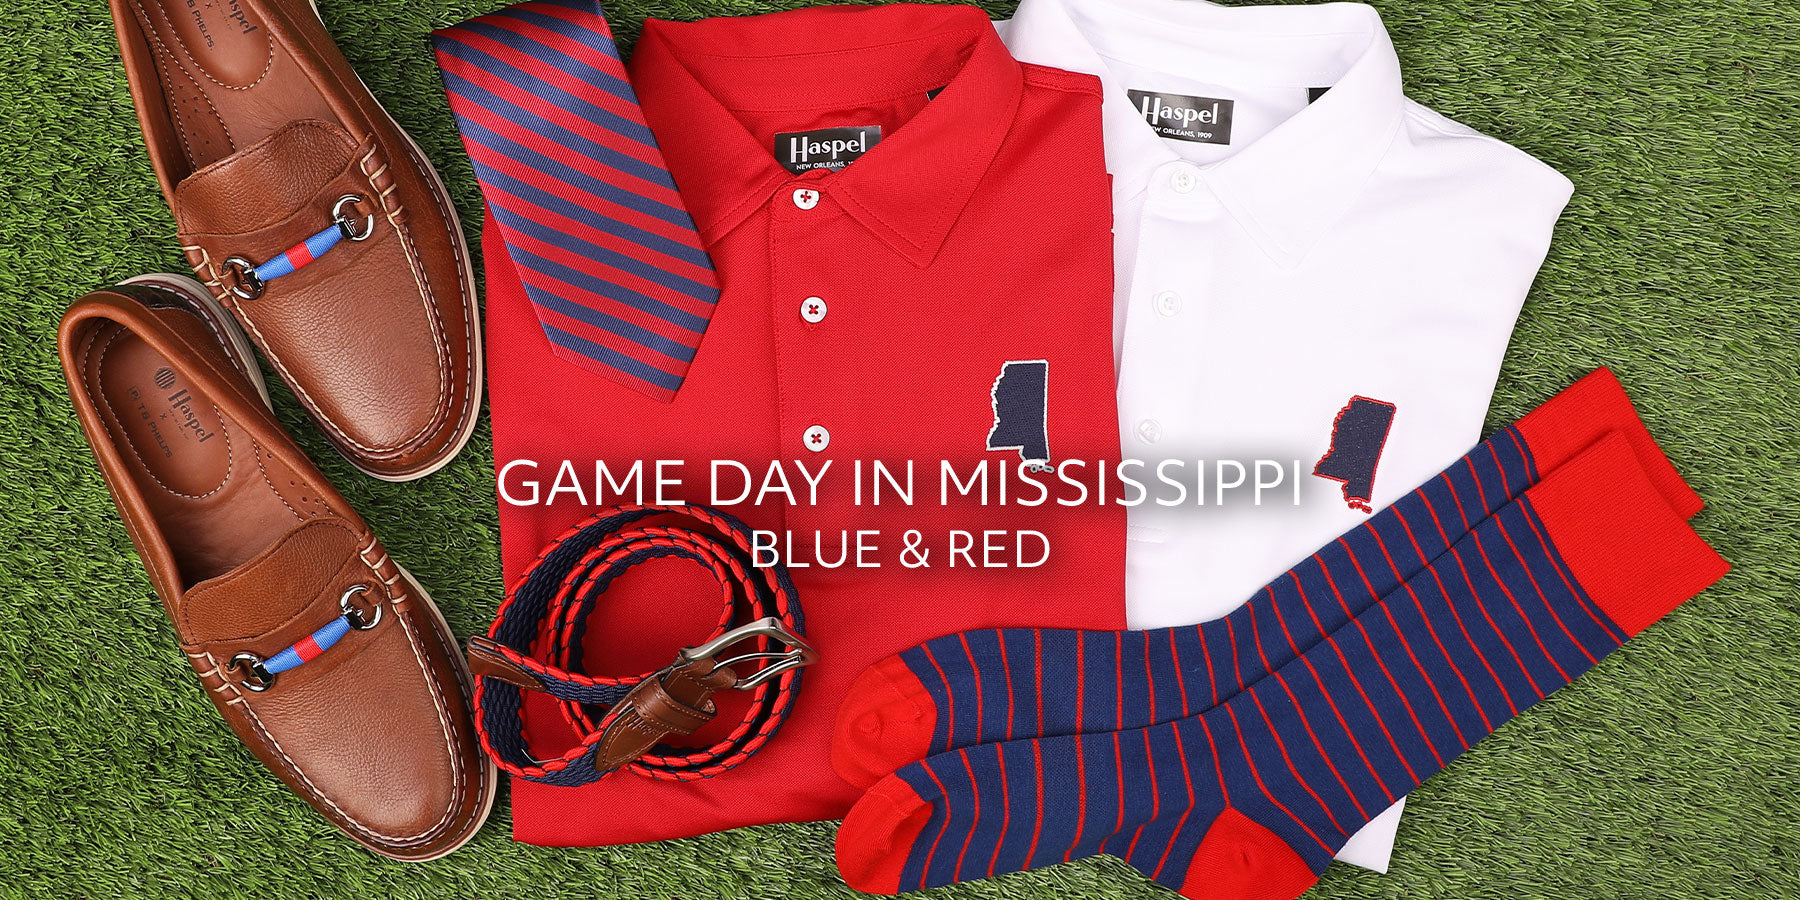 Game Day in Mississippi - Blue & Red